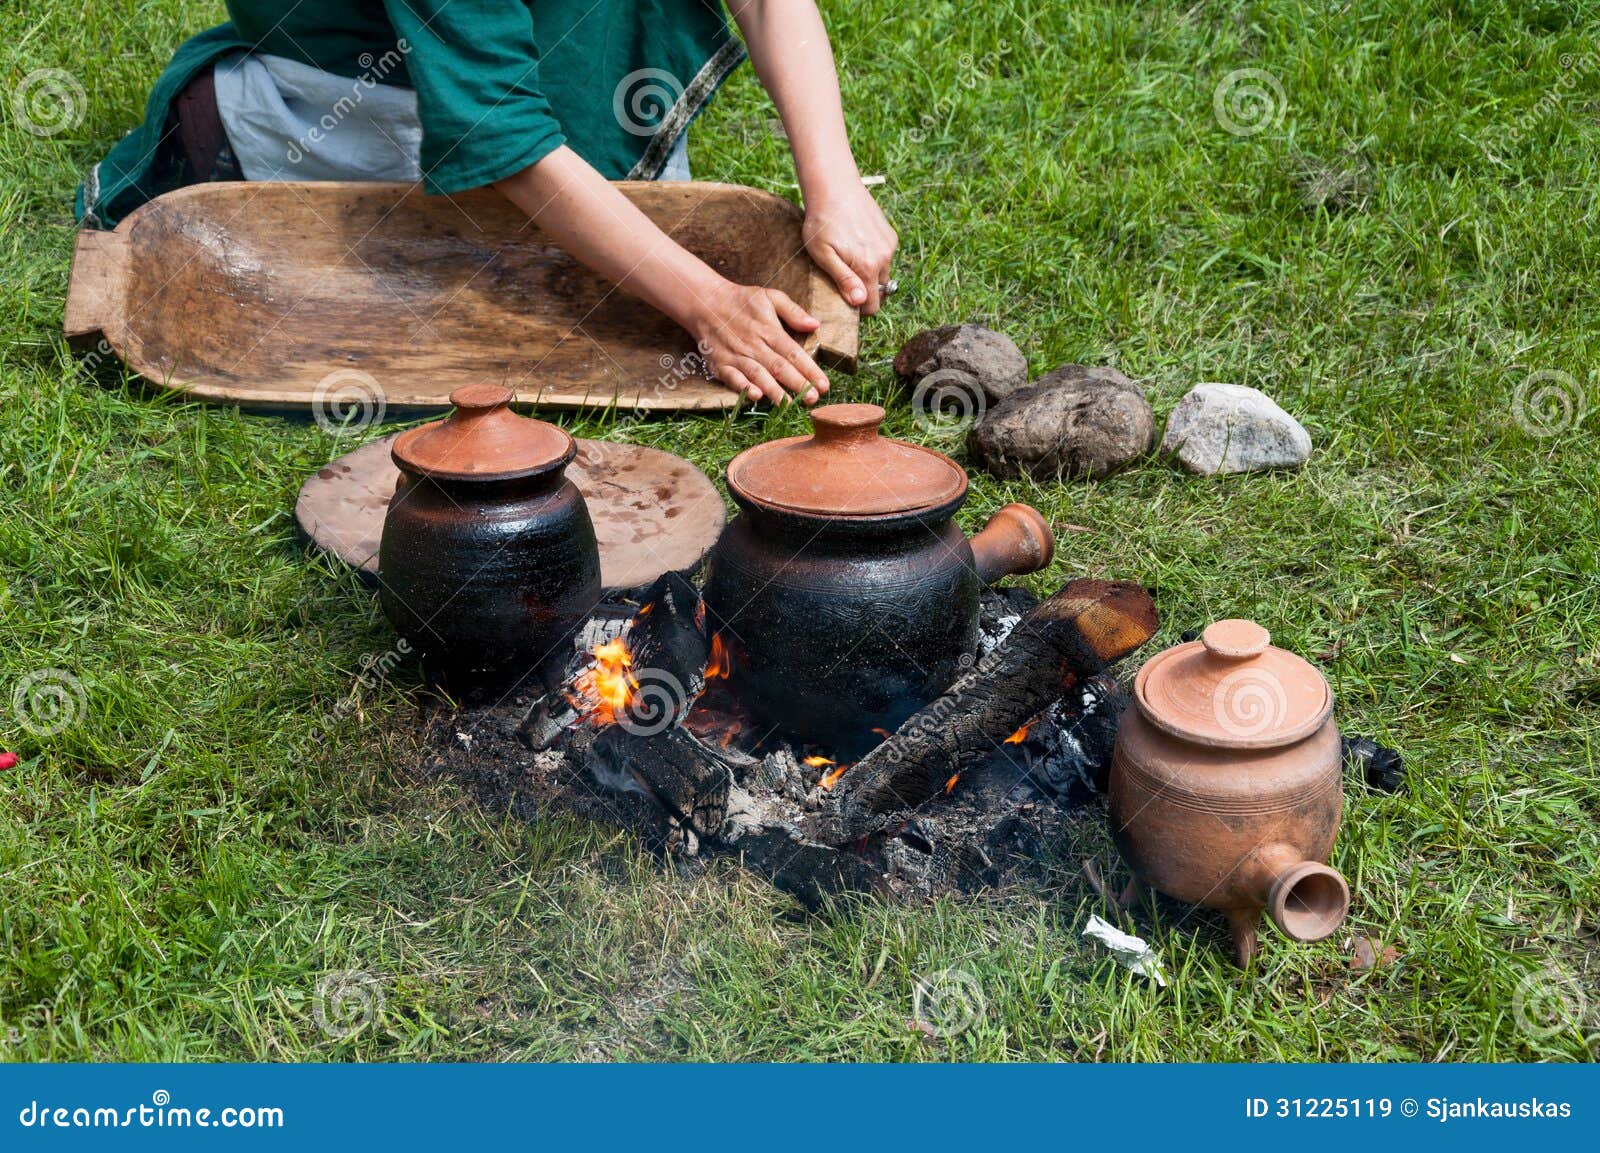 Medieval Lifestyle Royalty Free Stock Images - Image 31225119-4387